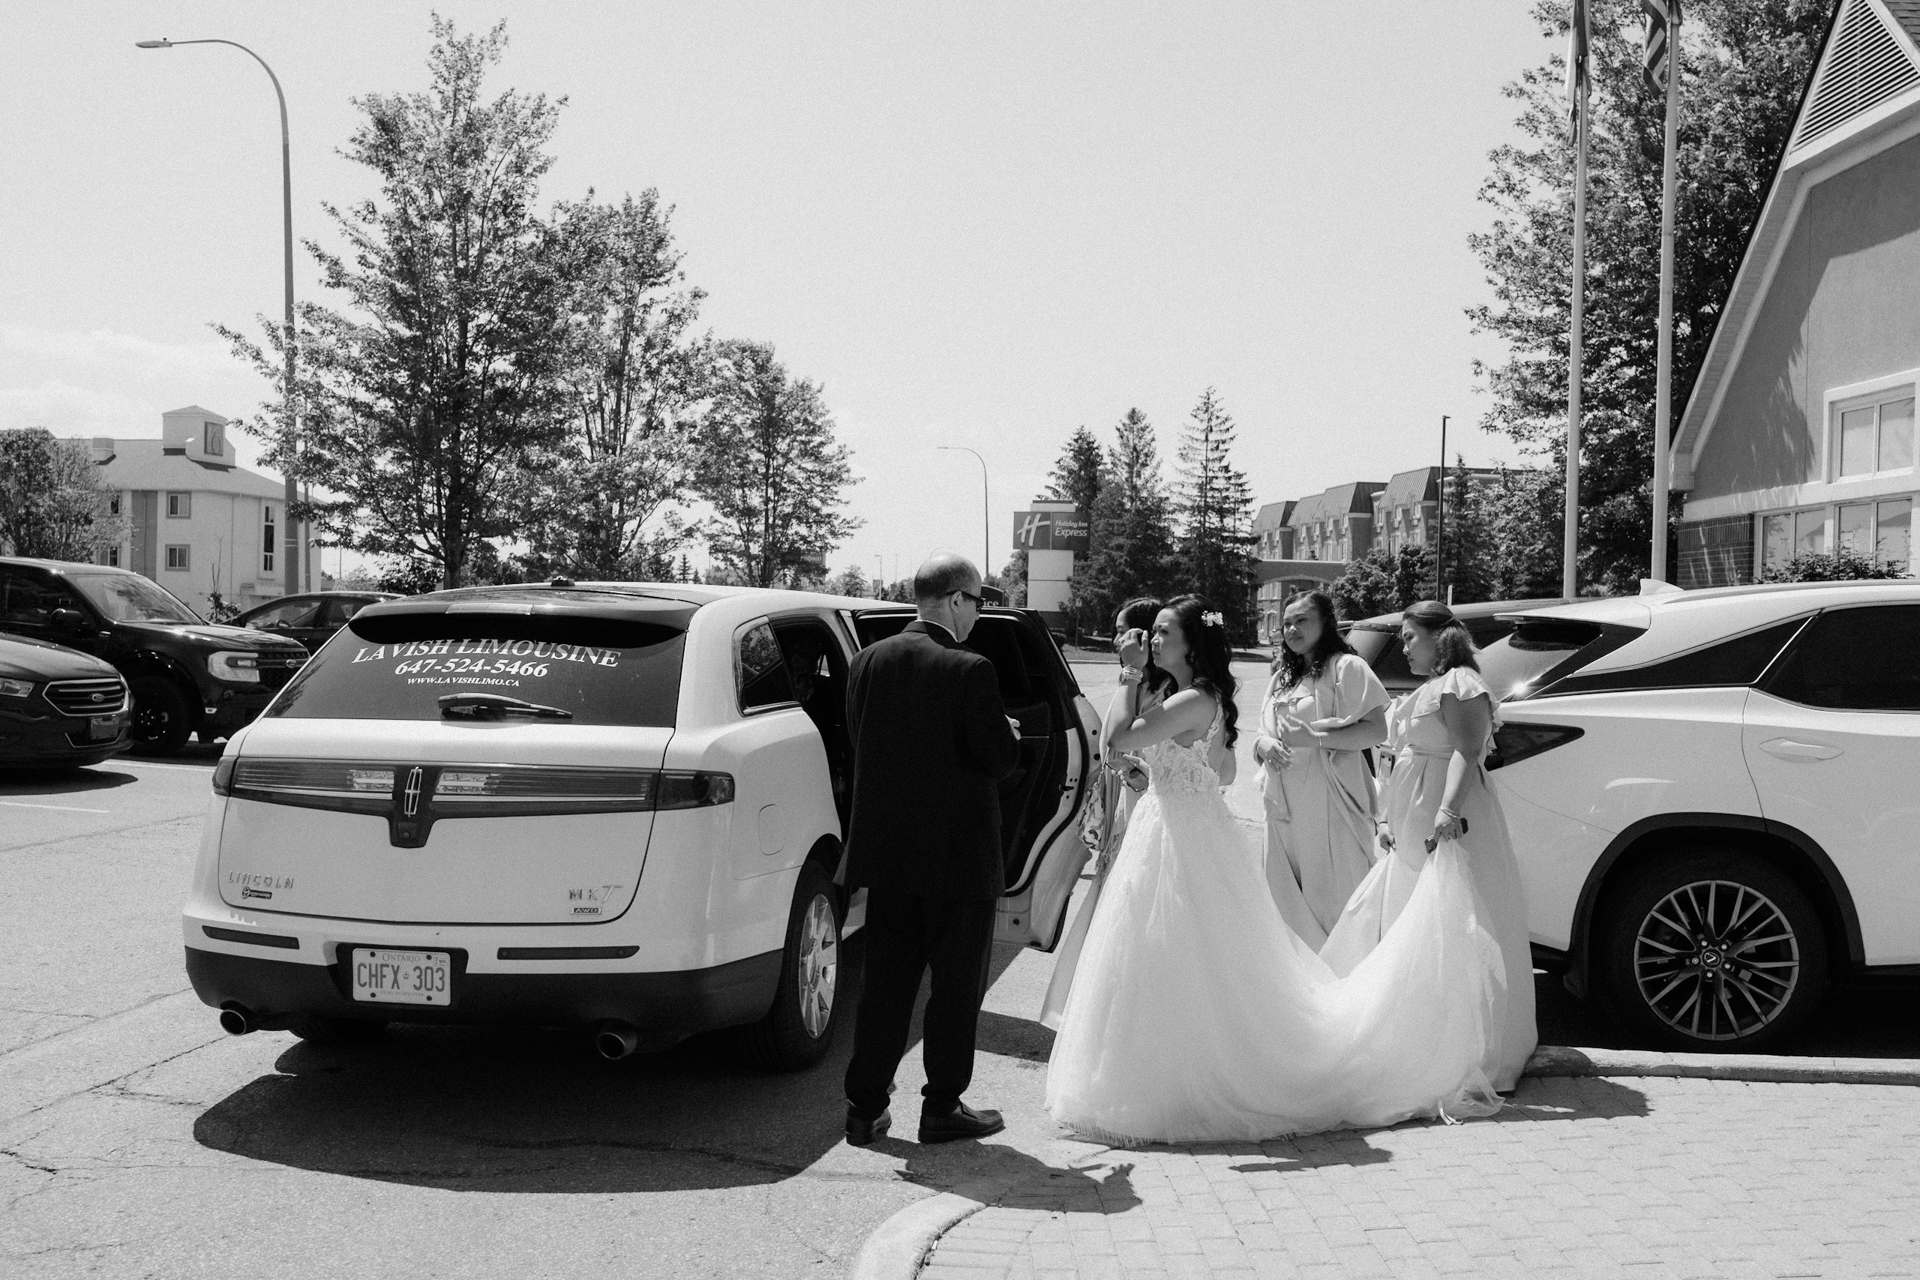 A bride stepping out of a limousine with assistance, accompanied by bridesmaids.